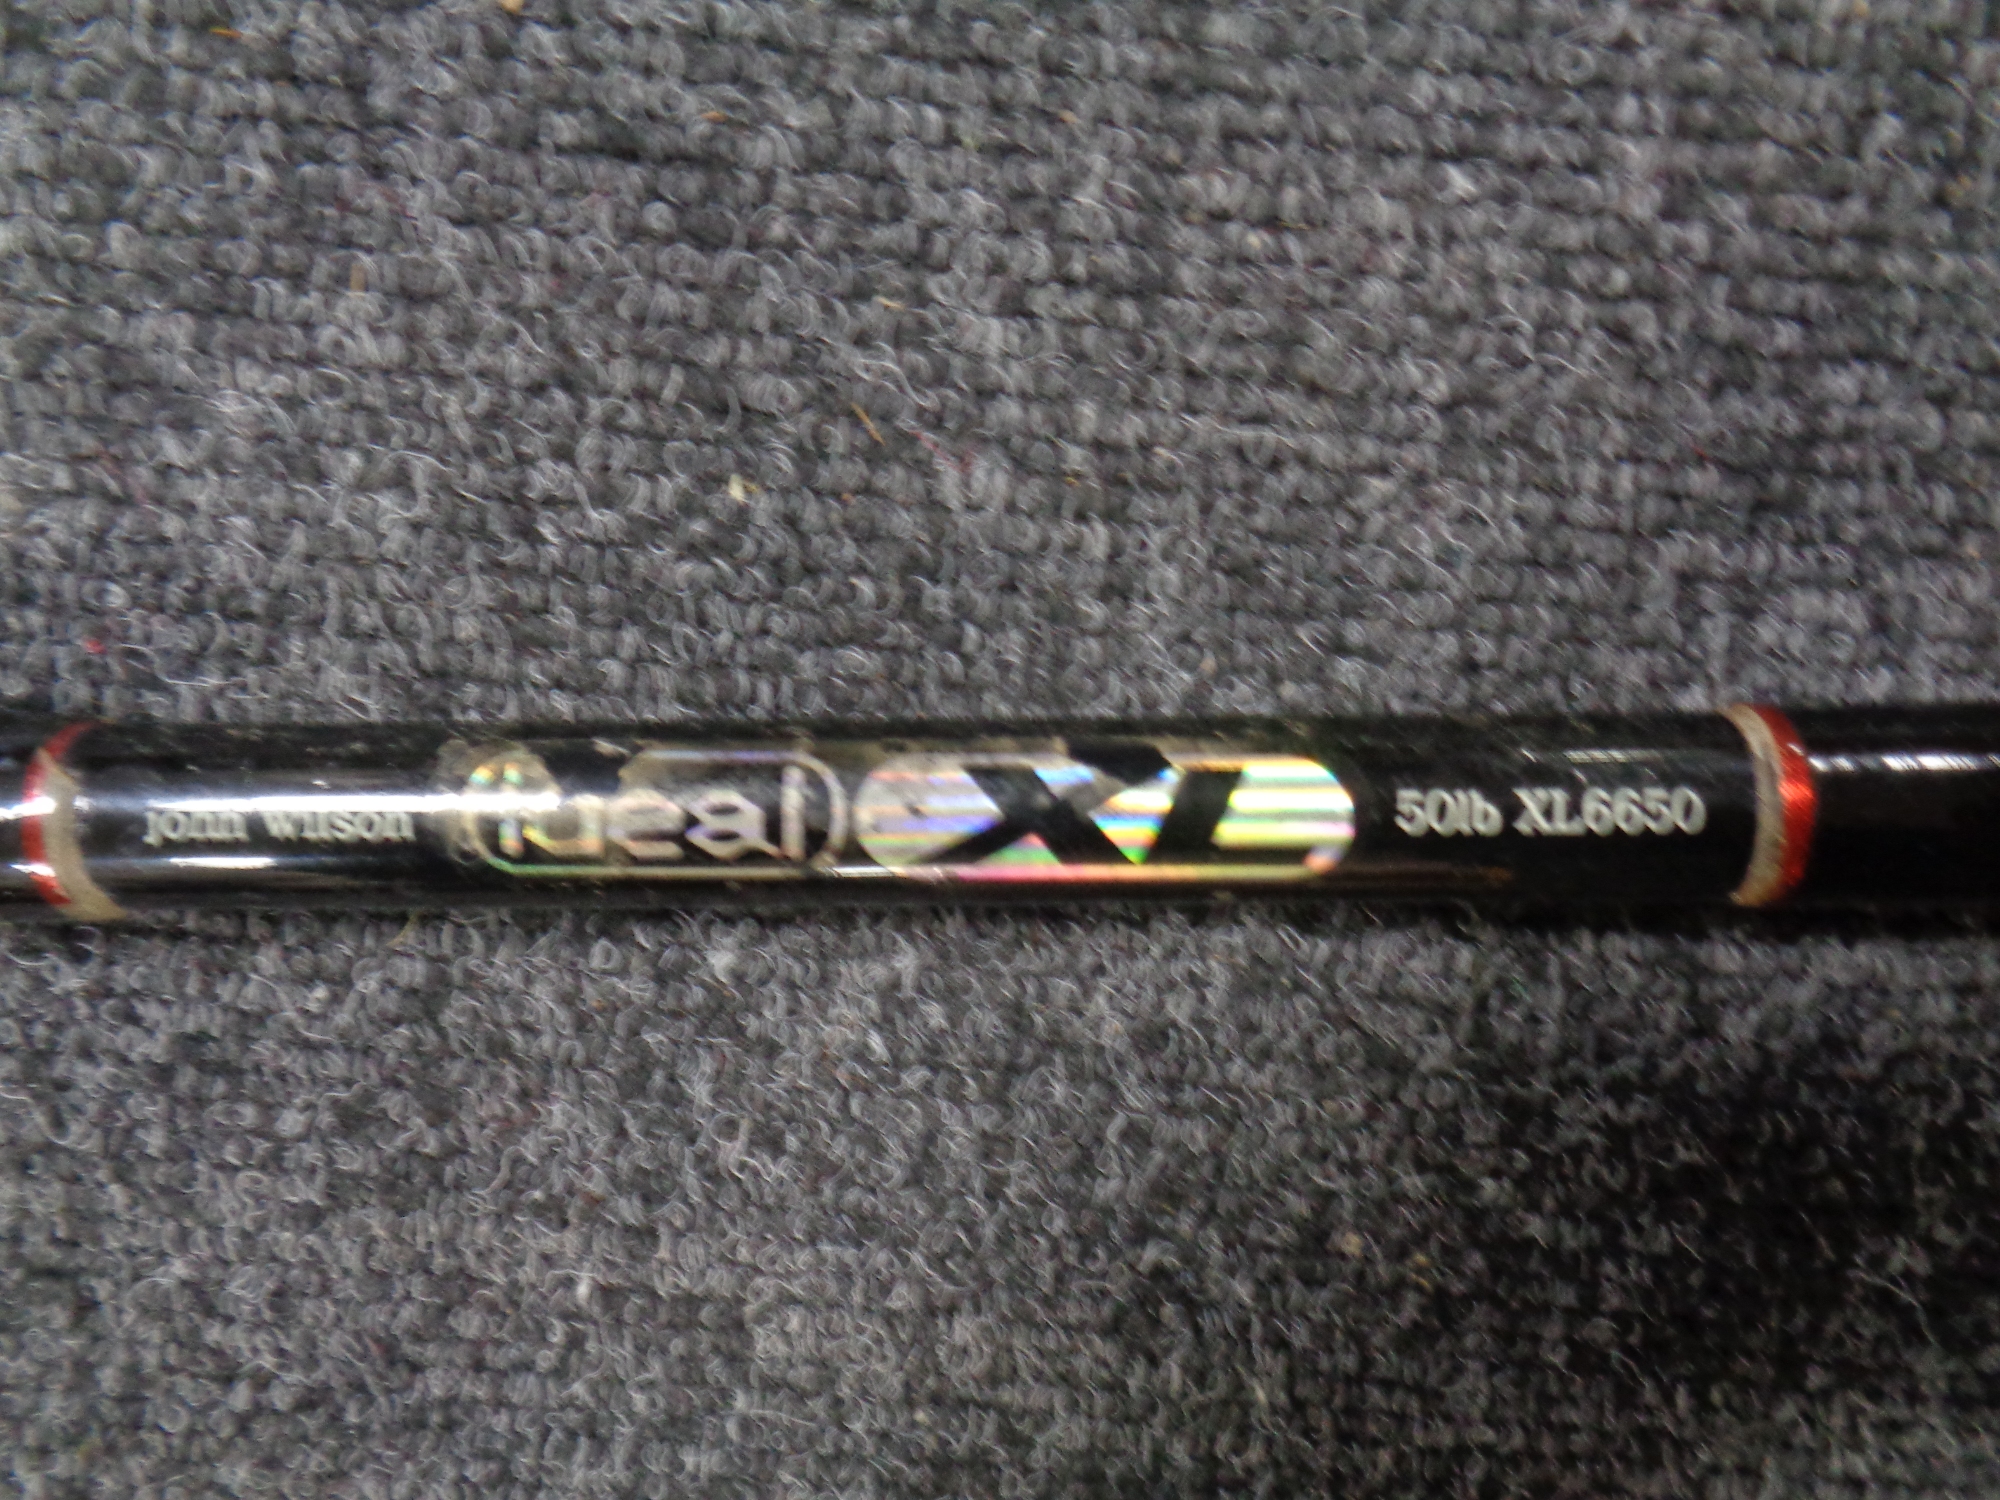 A John Wilson XL 6650 carp rod together with Scarborough fishing reel - Image 2 of 2